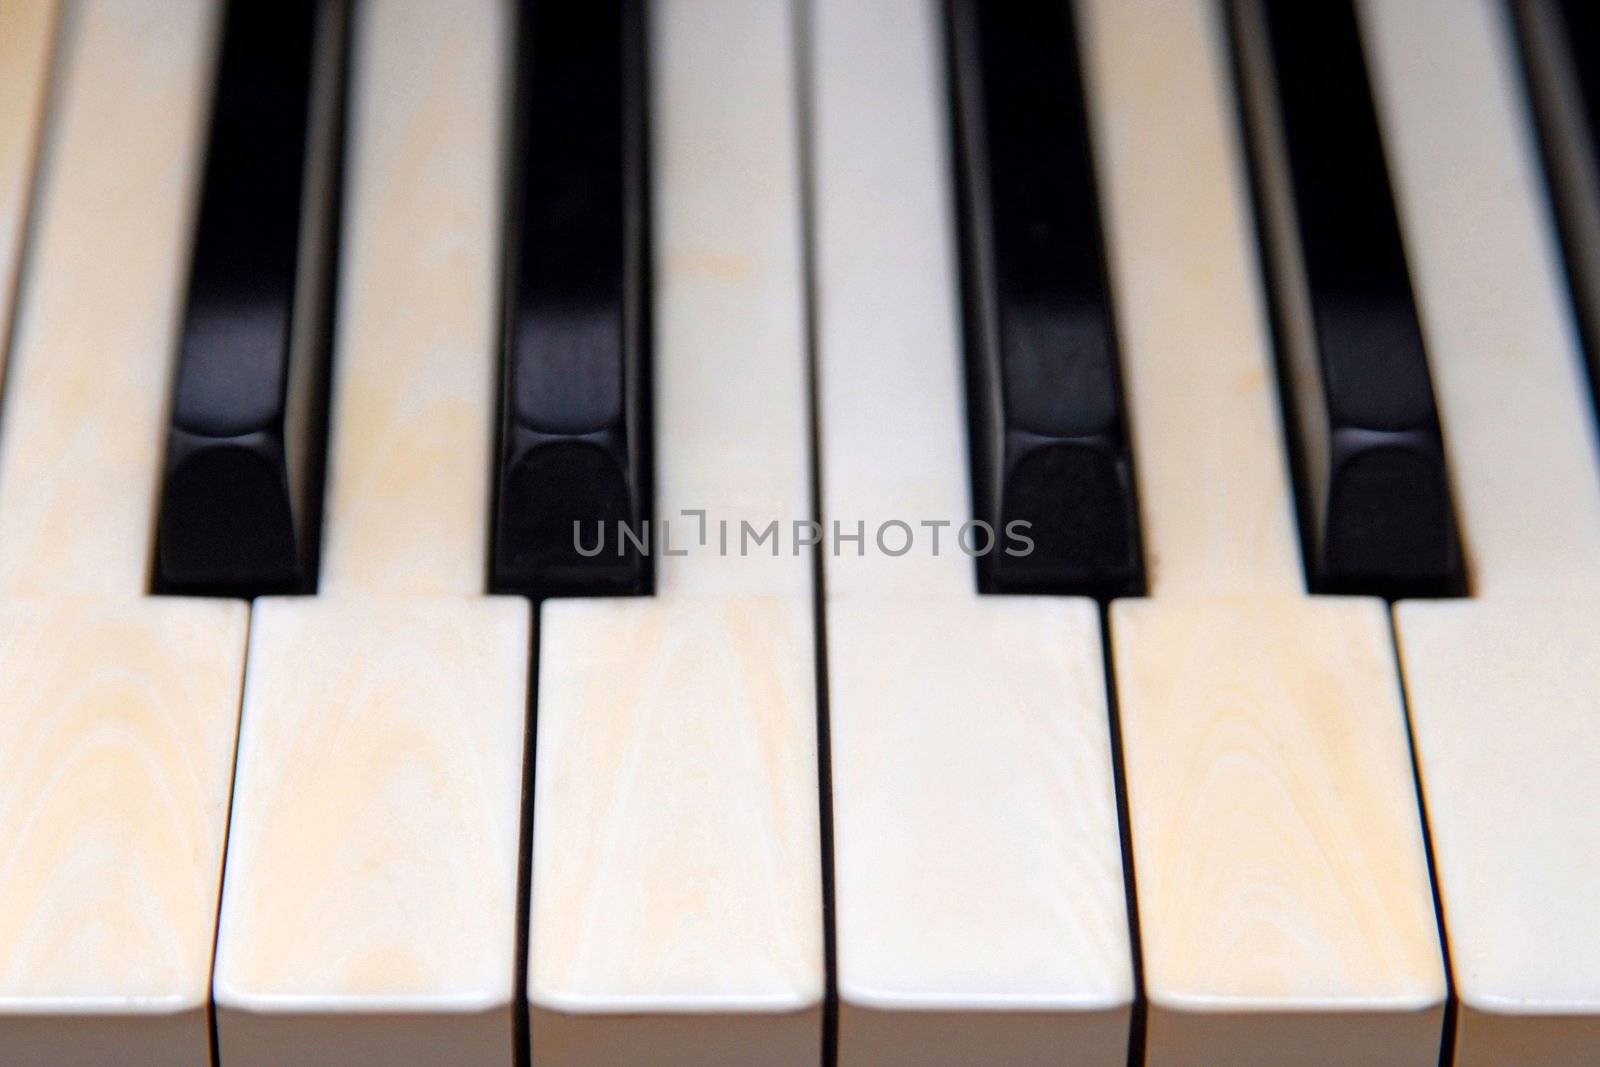 Close-up of the piano